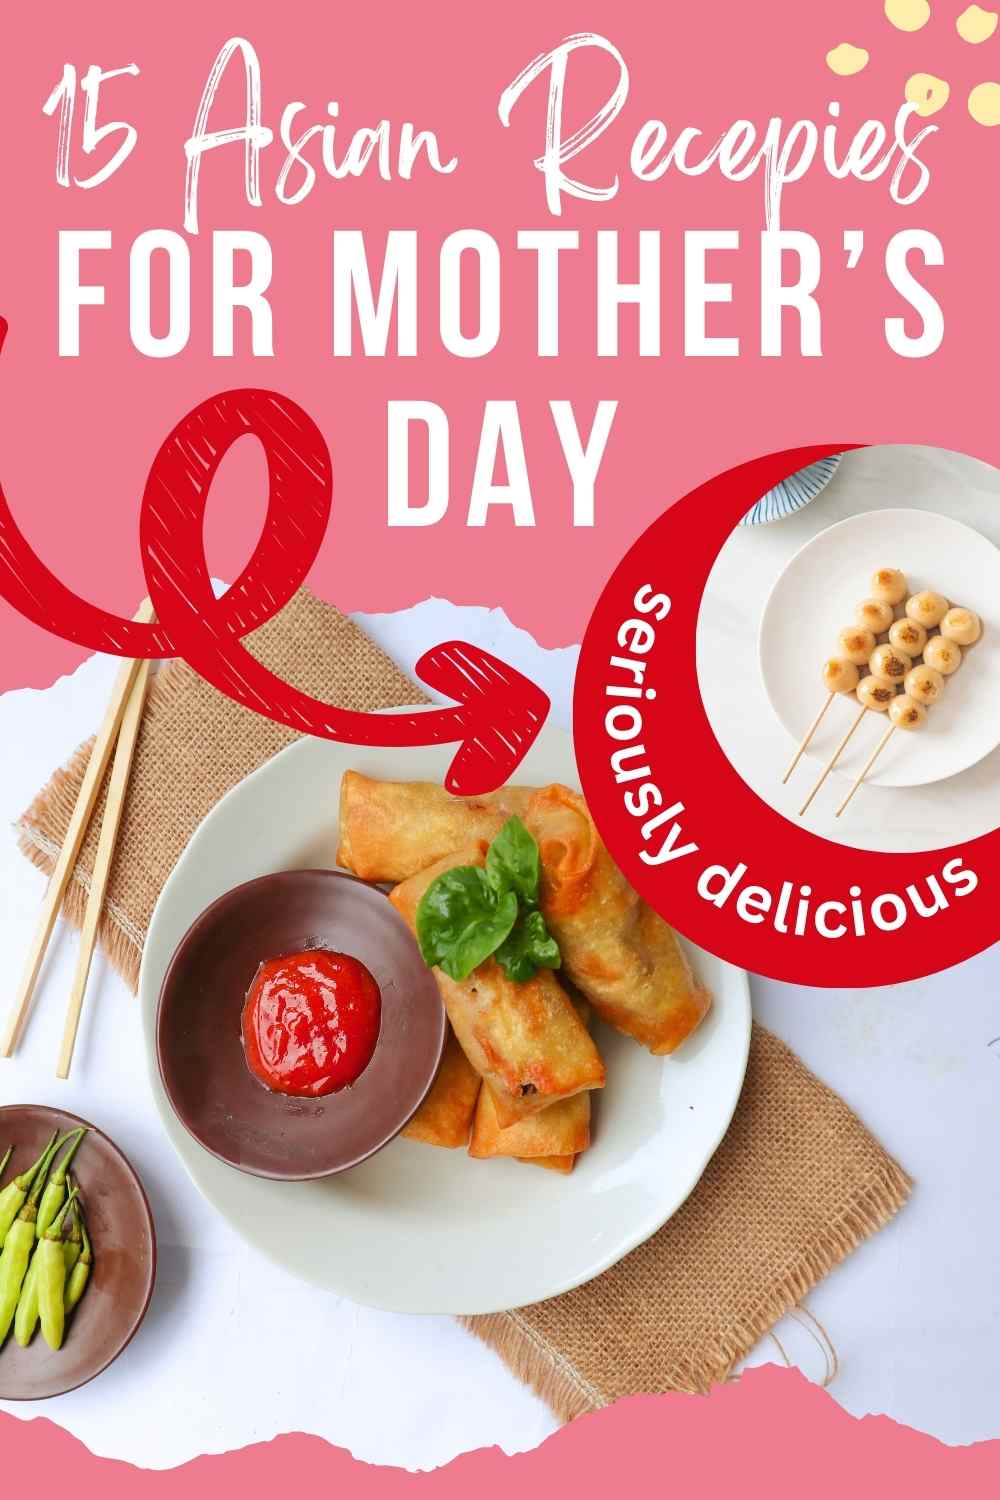 Mother’s Day Asian Food Ideas: 15 Mouthwatering Recipes for Lunch, Dinner, and Dessert!